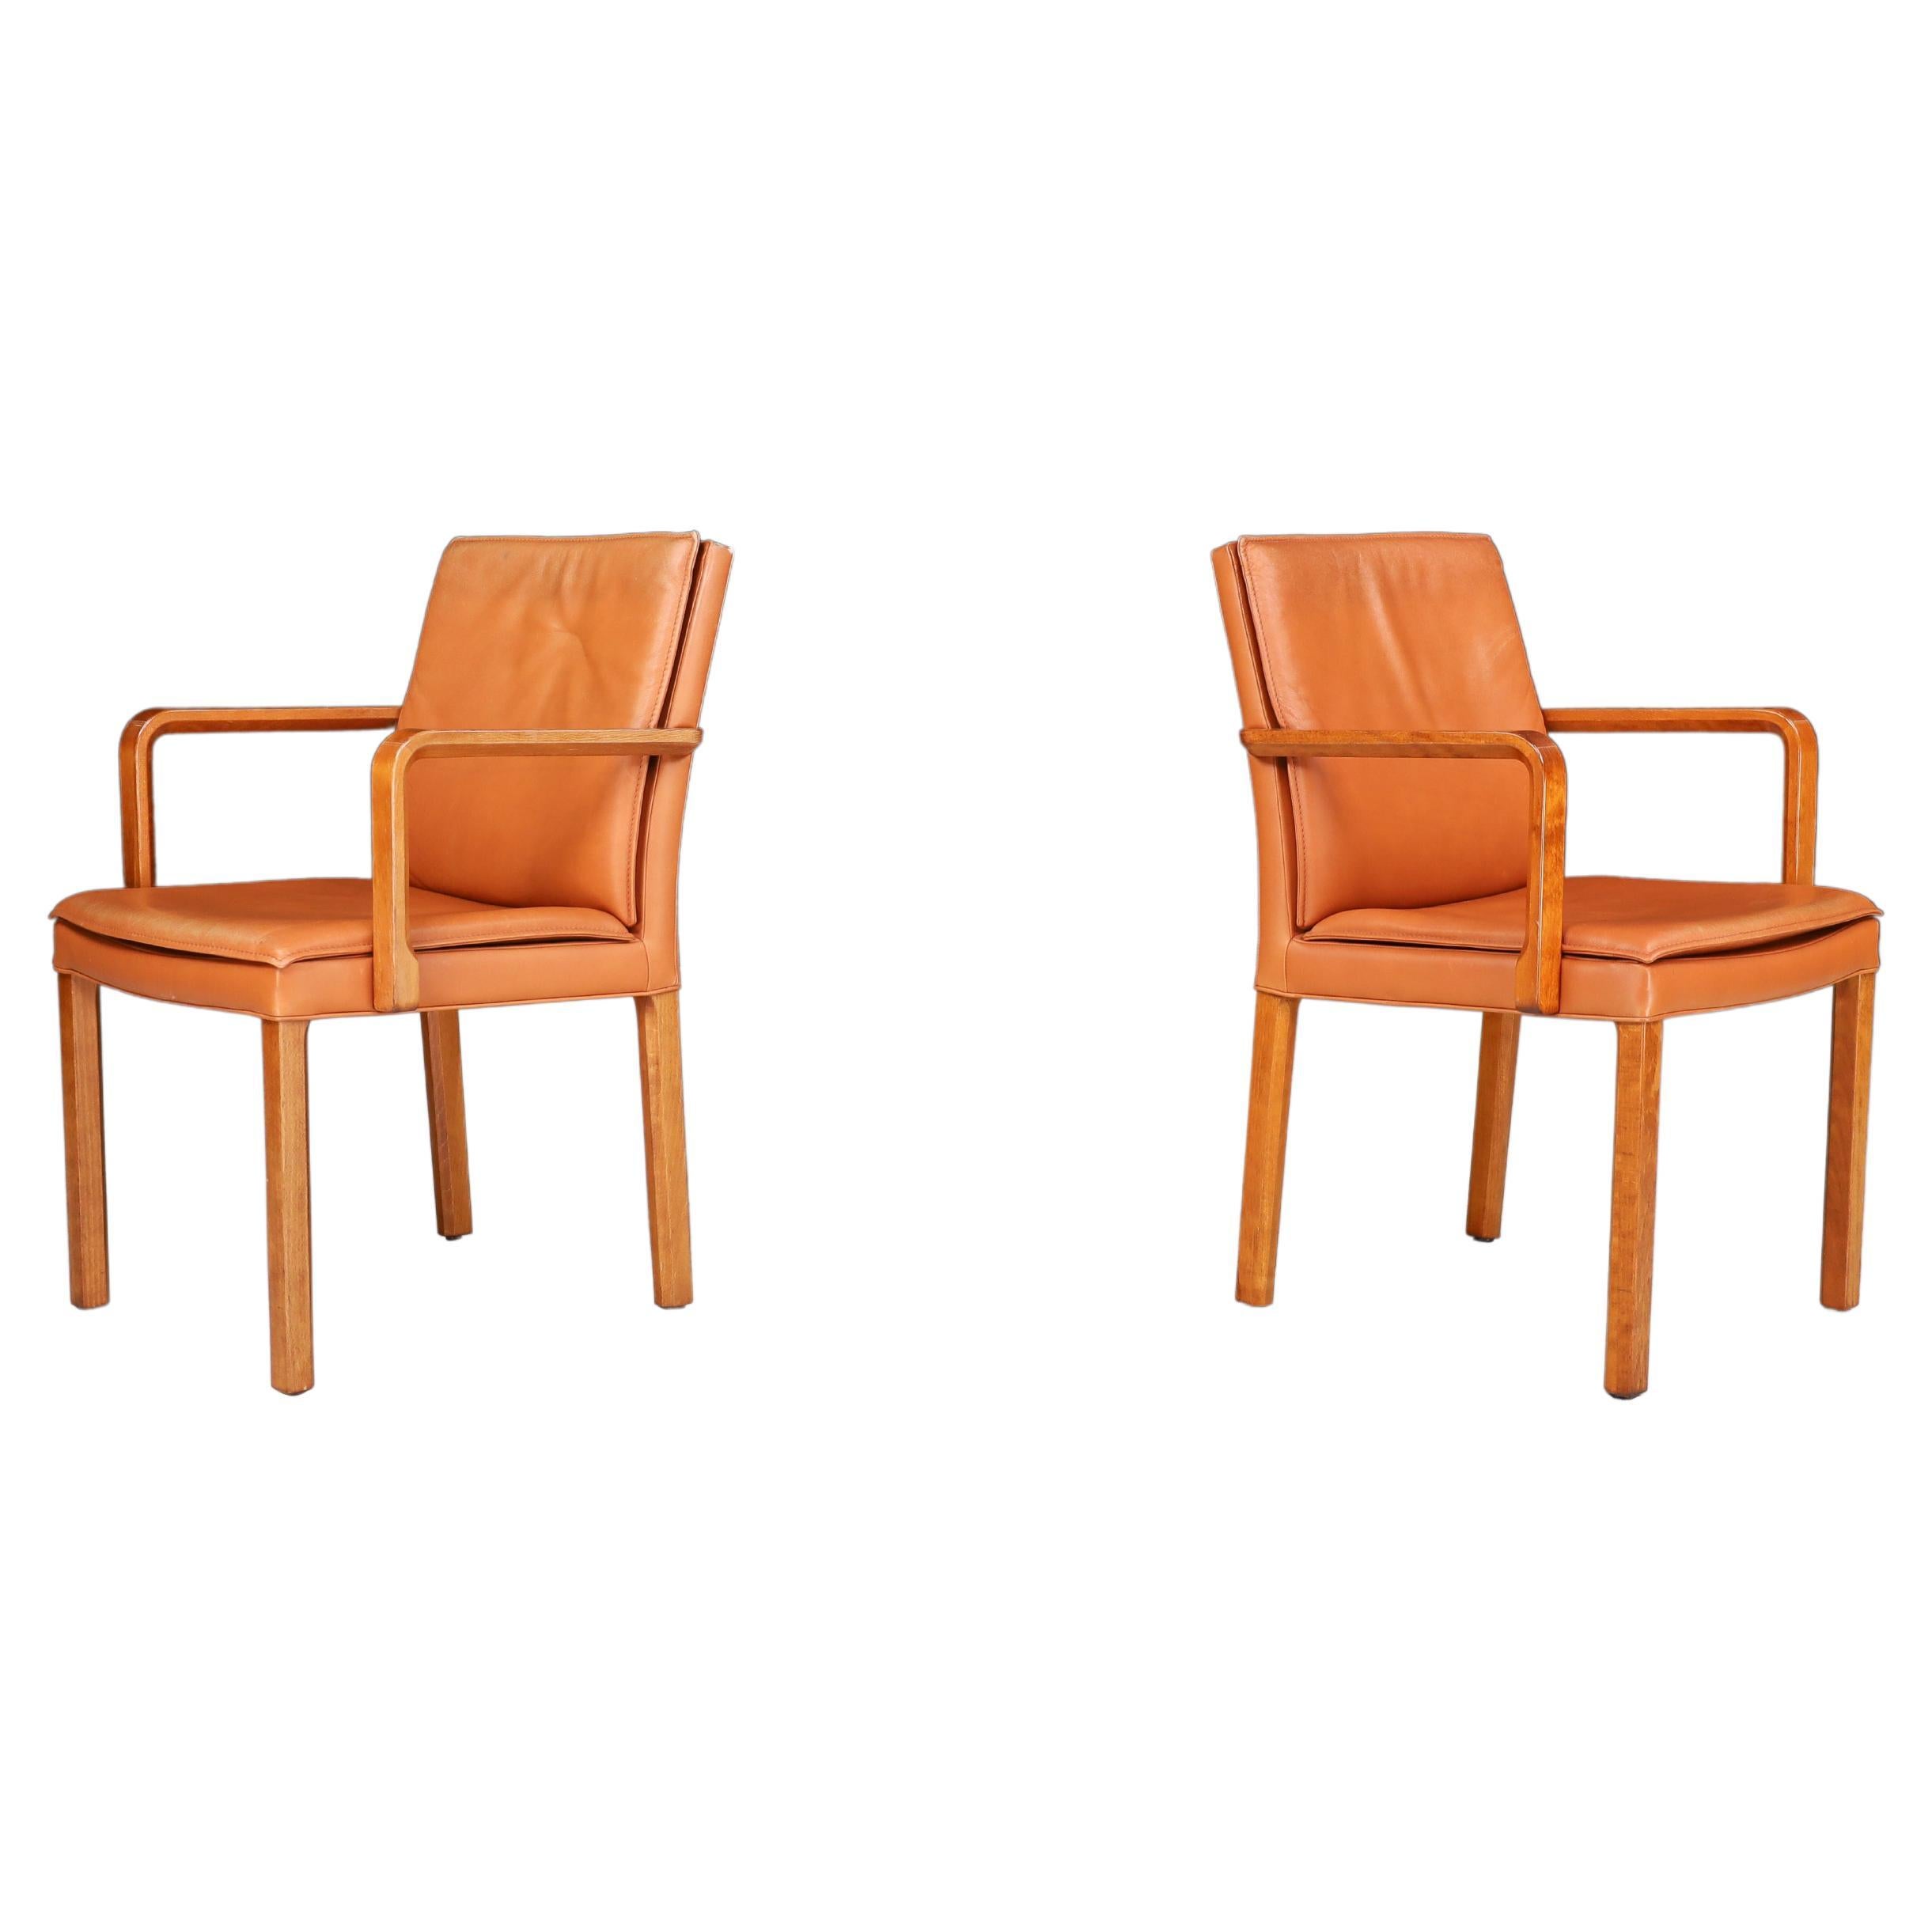 Walter Knoll Pair of two Arm chairs in Bentwood and Cognac Leather, Germany 1970 For Sale